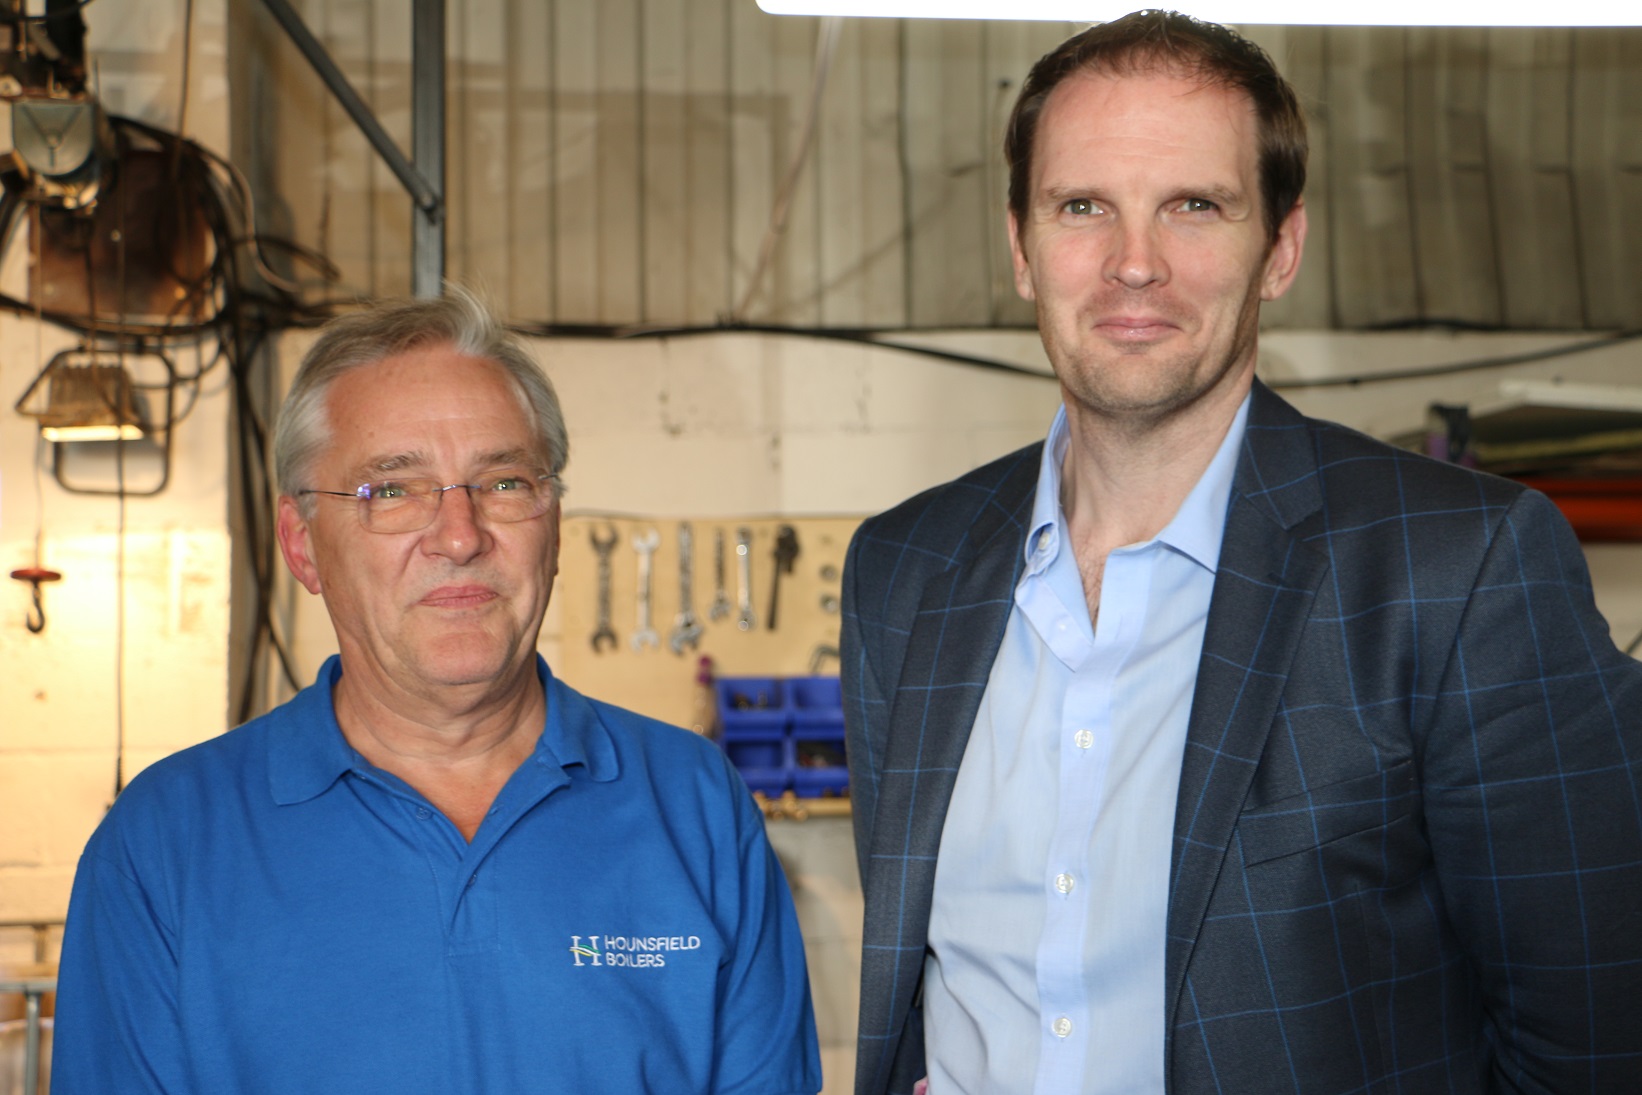 Dr Dan Poulter MP visits Hounsfield Boilers @AHounsfield